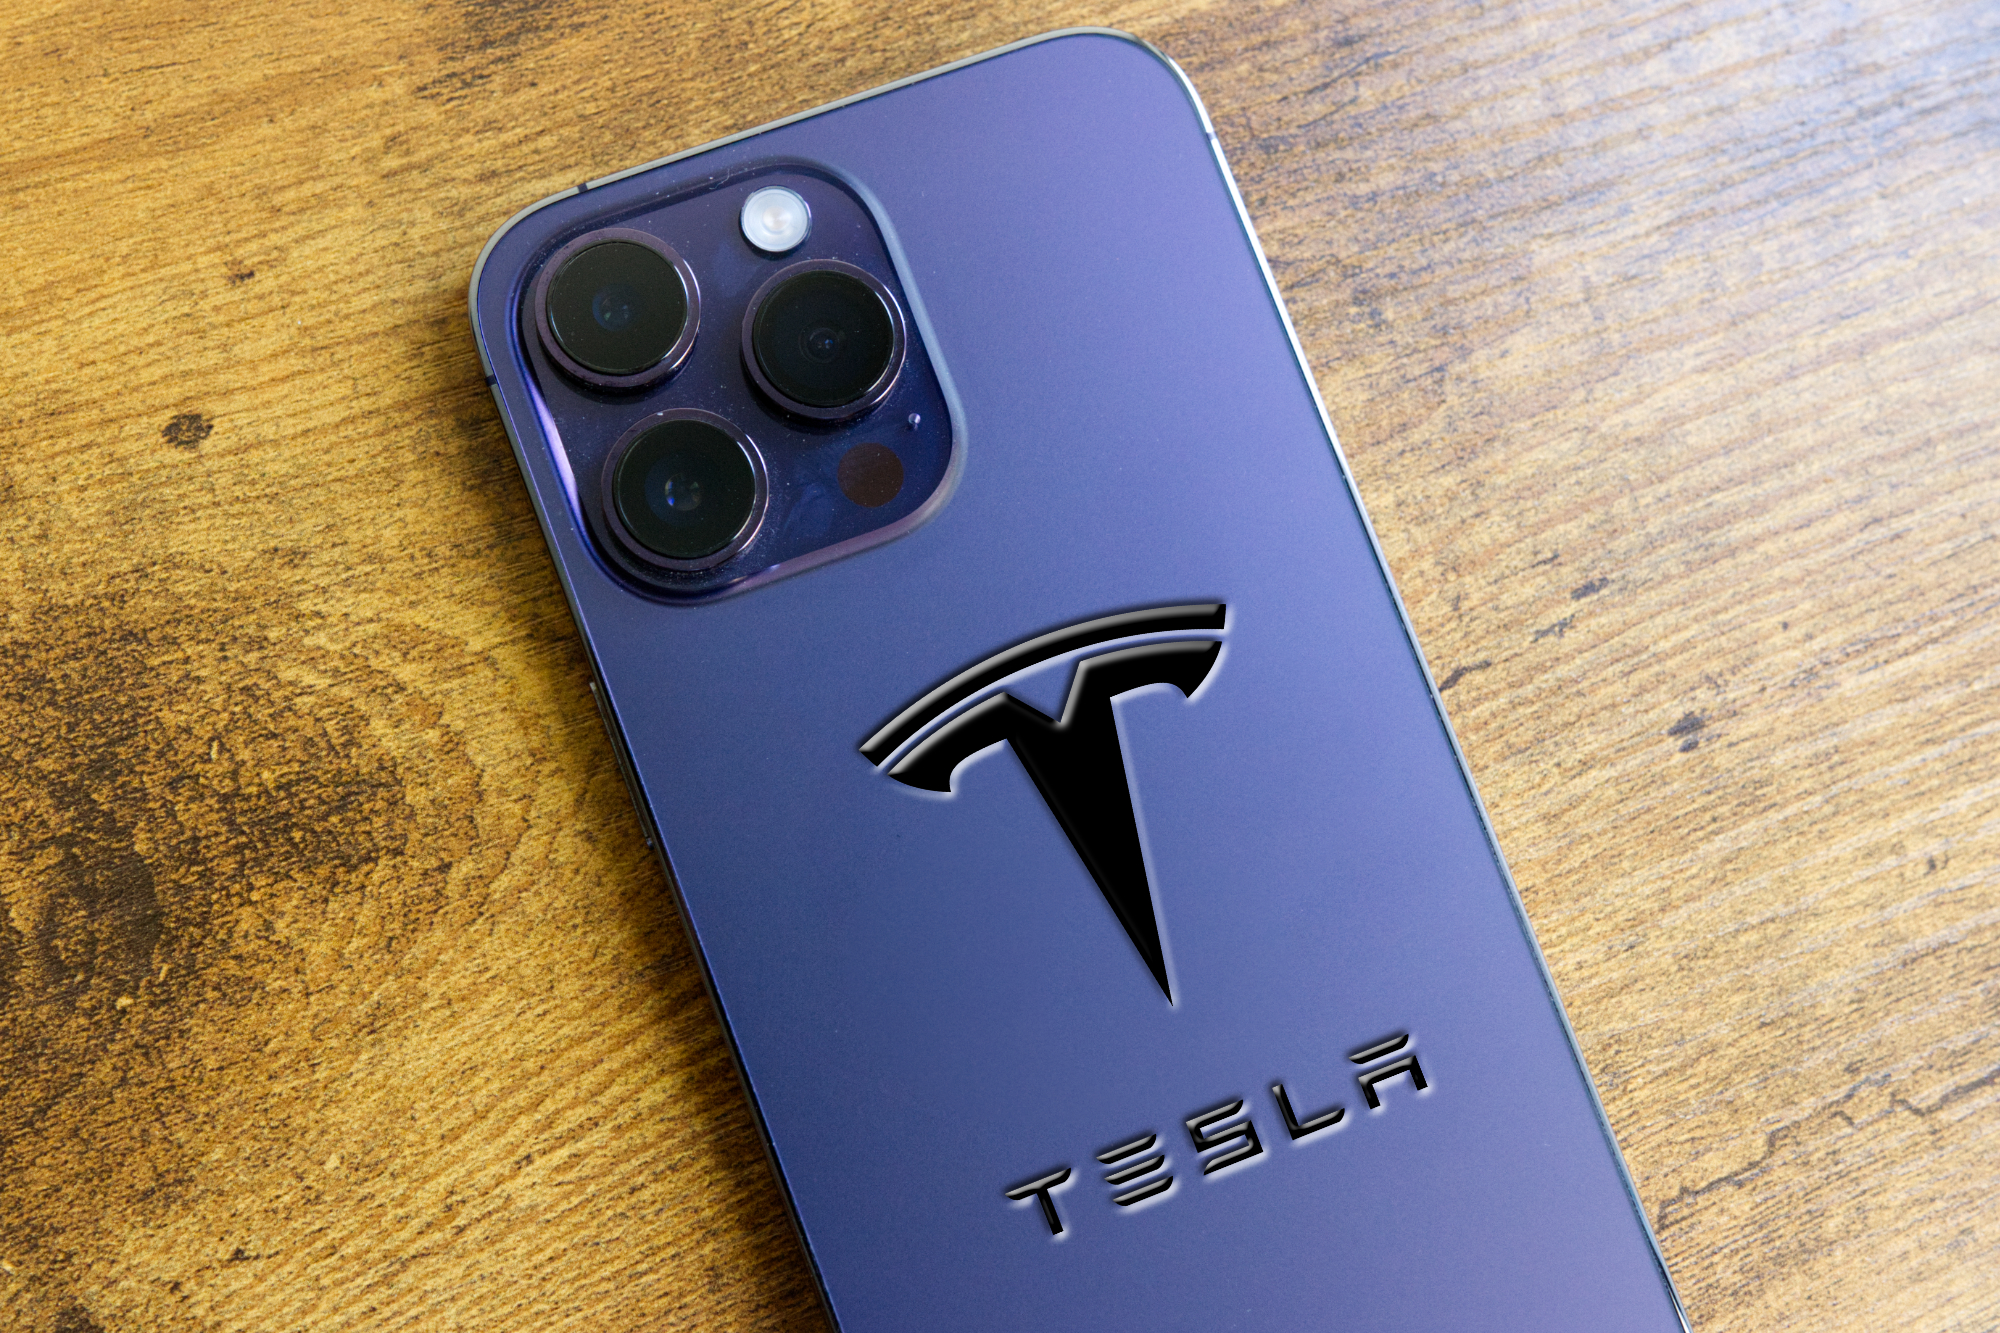 Sorry, Elon — your Tesla phone is never going to happen